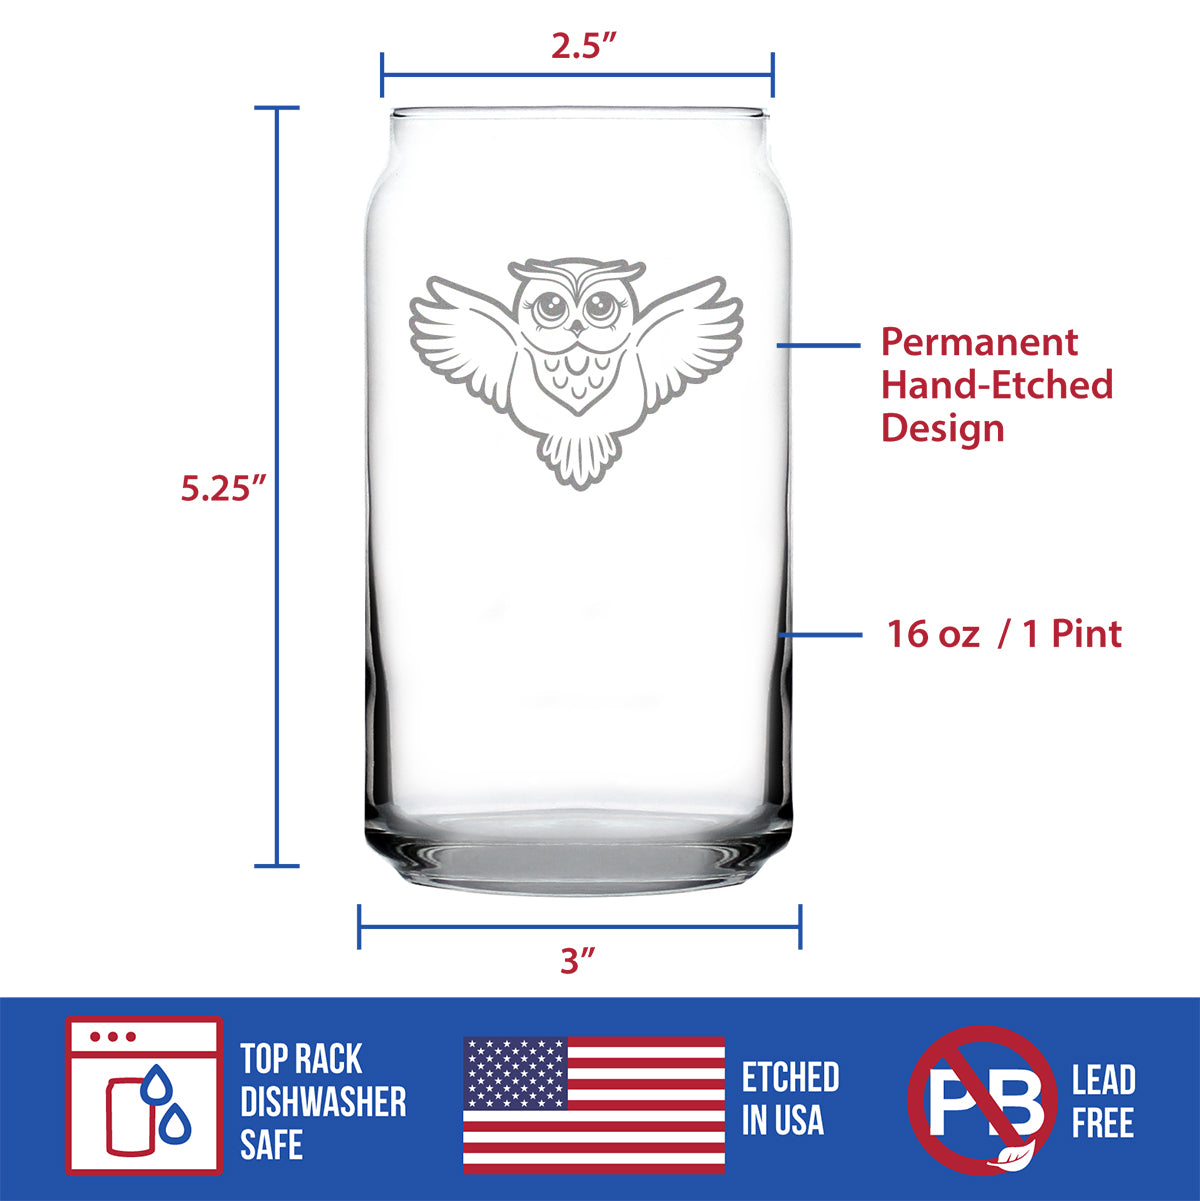 Cute Owl Beer Can Pint Glass - Fun Owl Decor and Gifts for Women and Men - 16 Oz Glasses